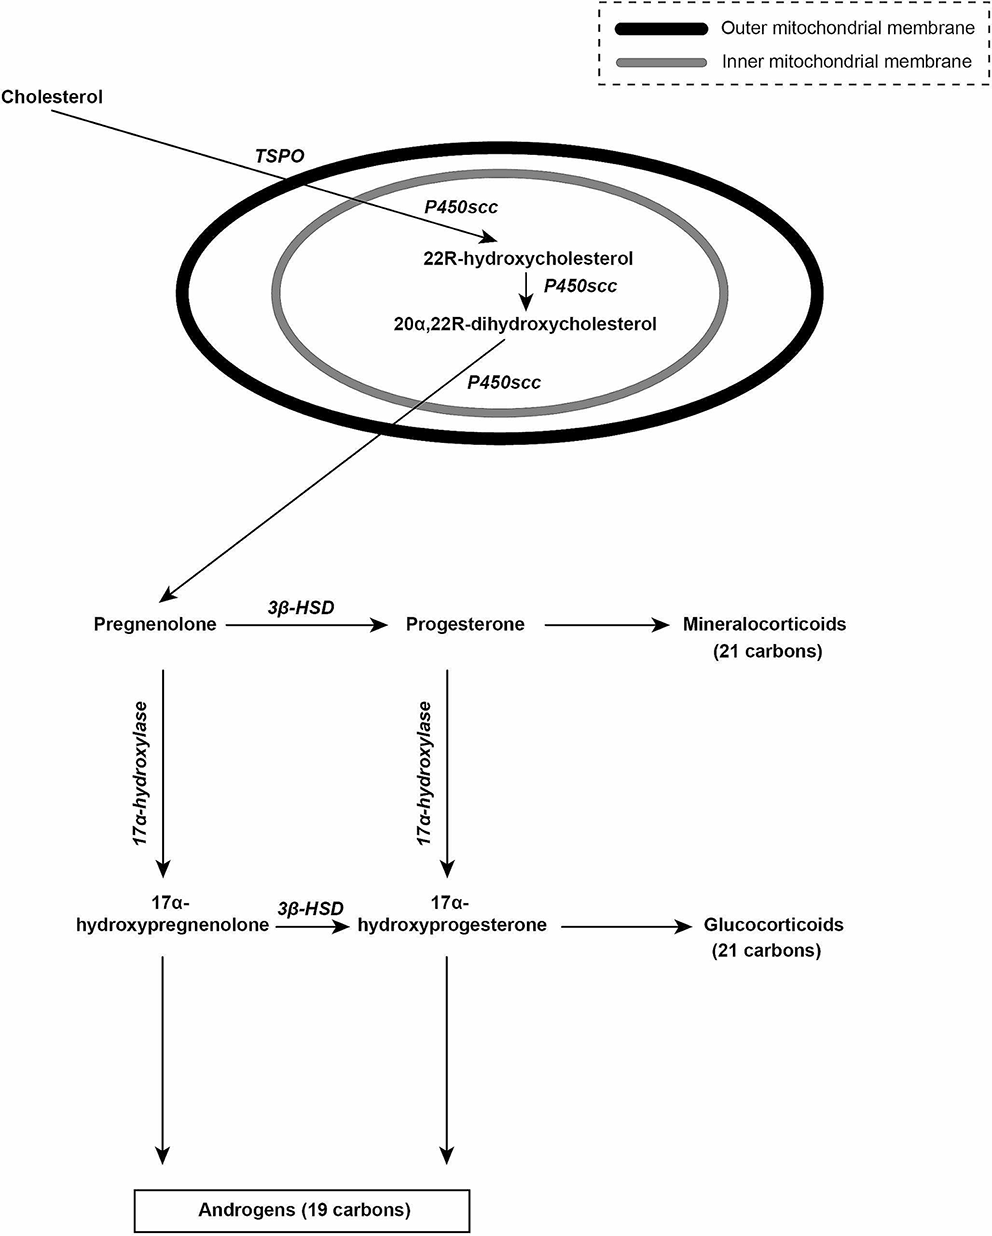 Diagnostic and therapeutic use of oral micronized progesterone in endocrinology